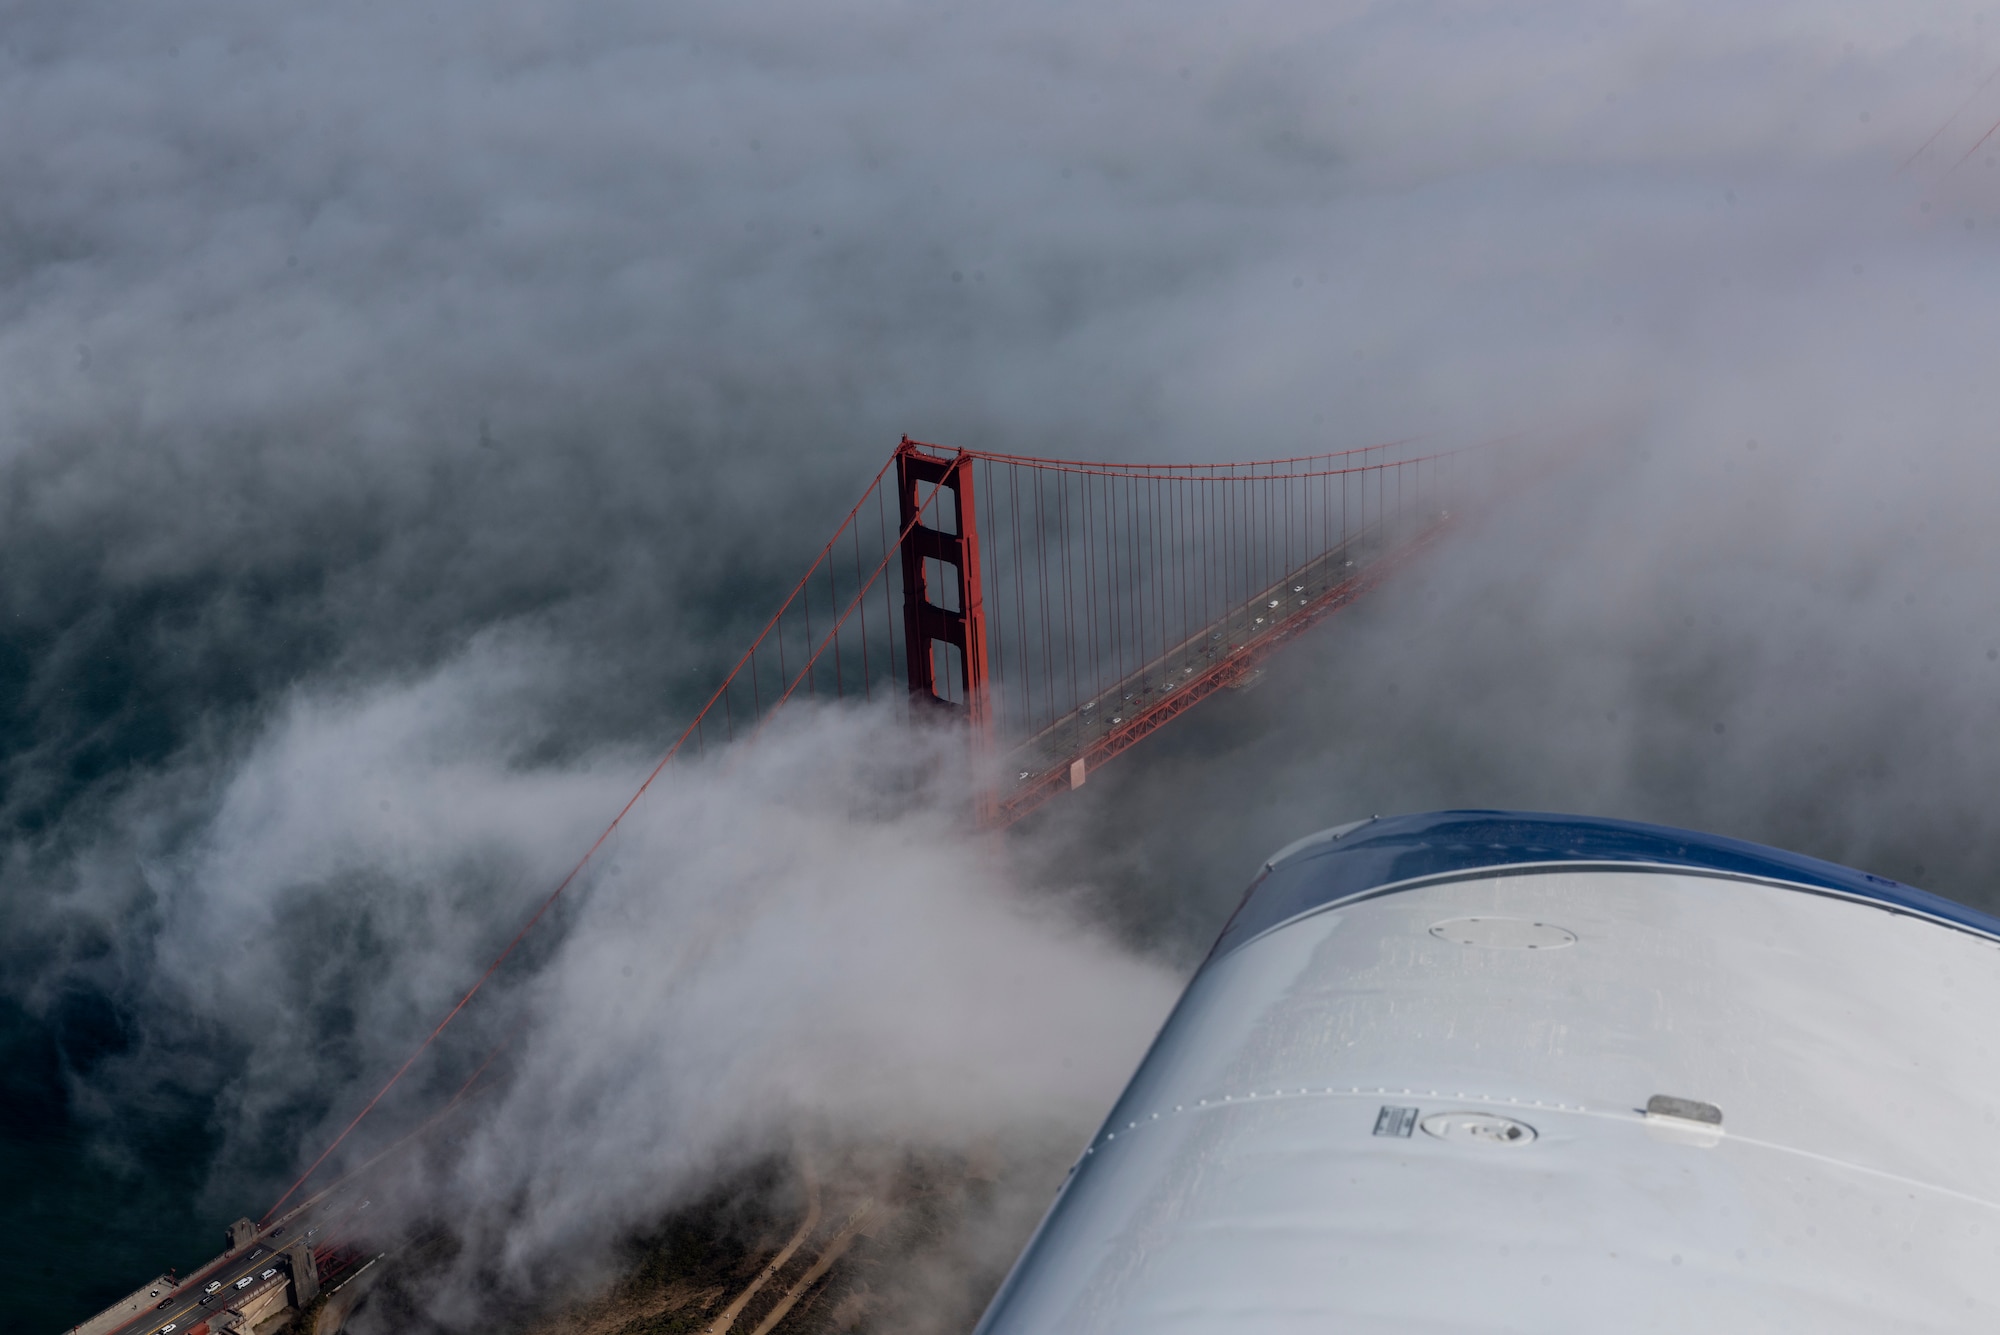 The Golden Gate Bridge is visible from a Socata Trinidad TB-20 aircraft July 27, 2019, during a flight over the San Francisco Bay Area. The plane was piloted by U.S. Air Force Tech. Sgt. Ron, 860th Aircraft Maintenance Squadron flight line expediter. Ron has accumulated more than 250 flying hours and completed Air Force remote pilot aircraft training July 12. (U.S. Air Force photo by Tech. Sgt. James Hodgman)